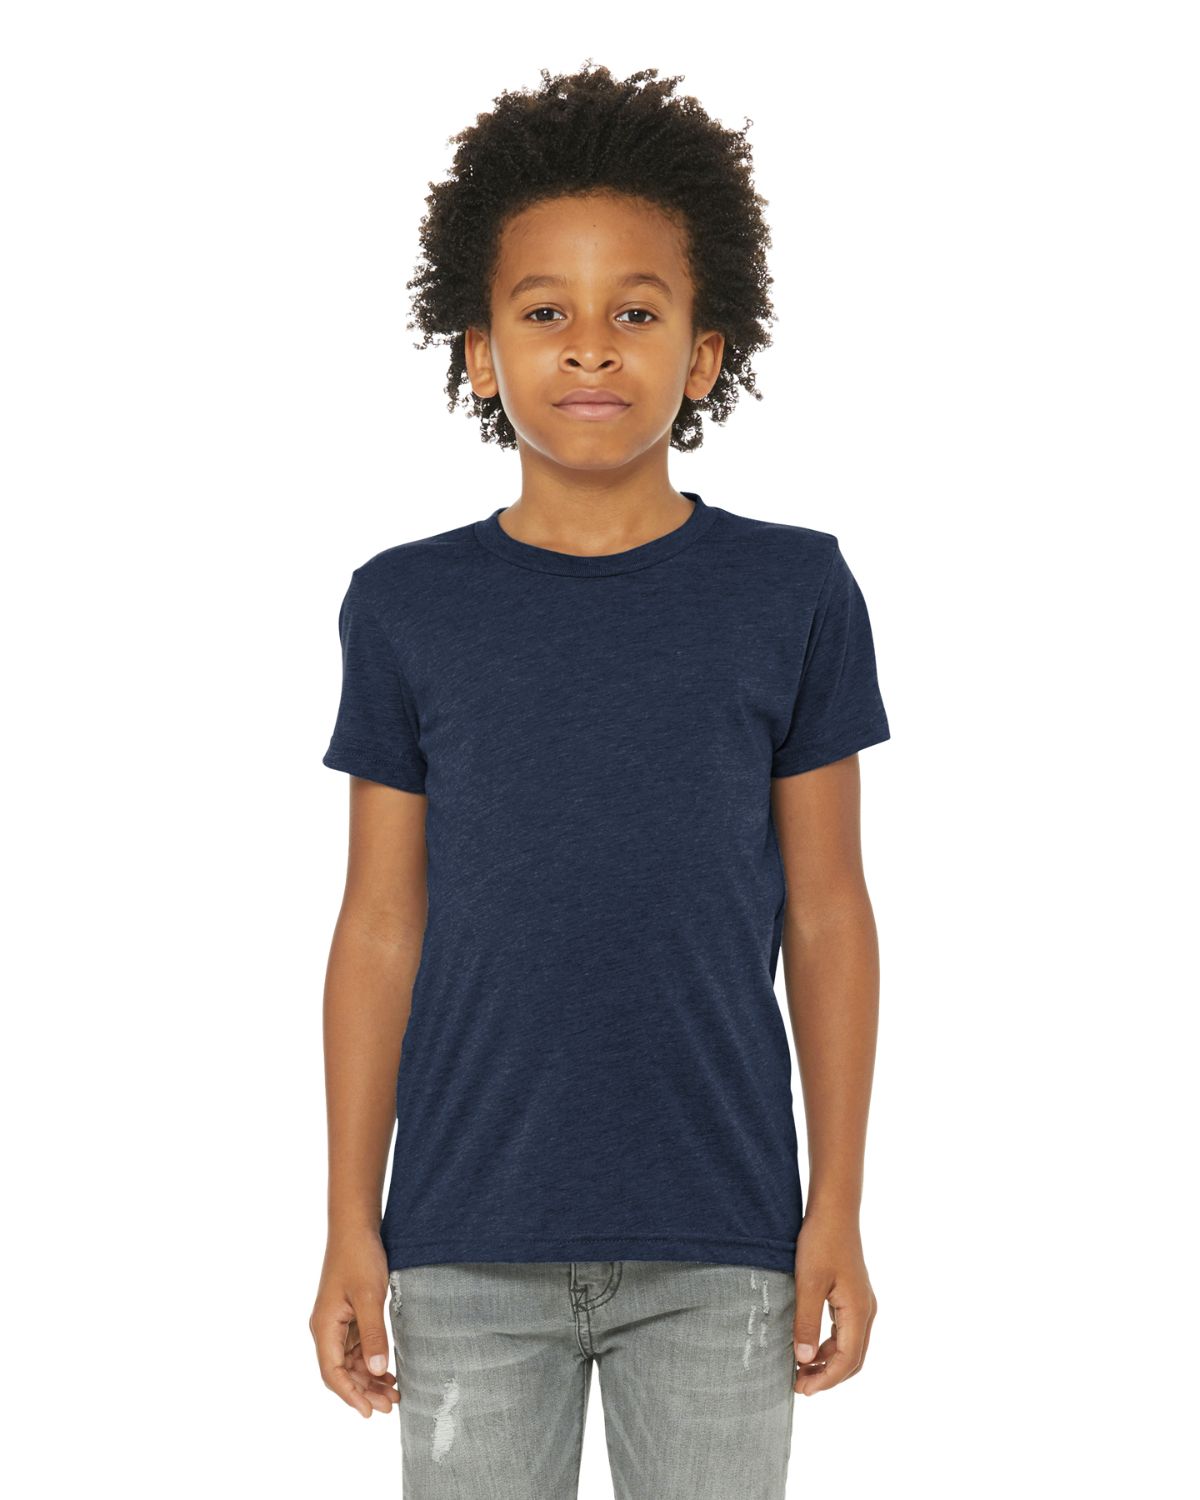 Bella + Canvas BC3413Y Youth Triblend Short Sleeve Tee